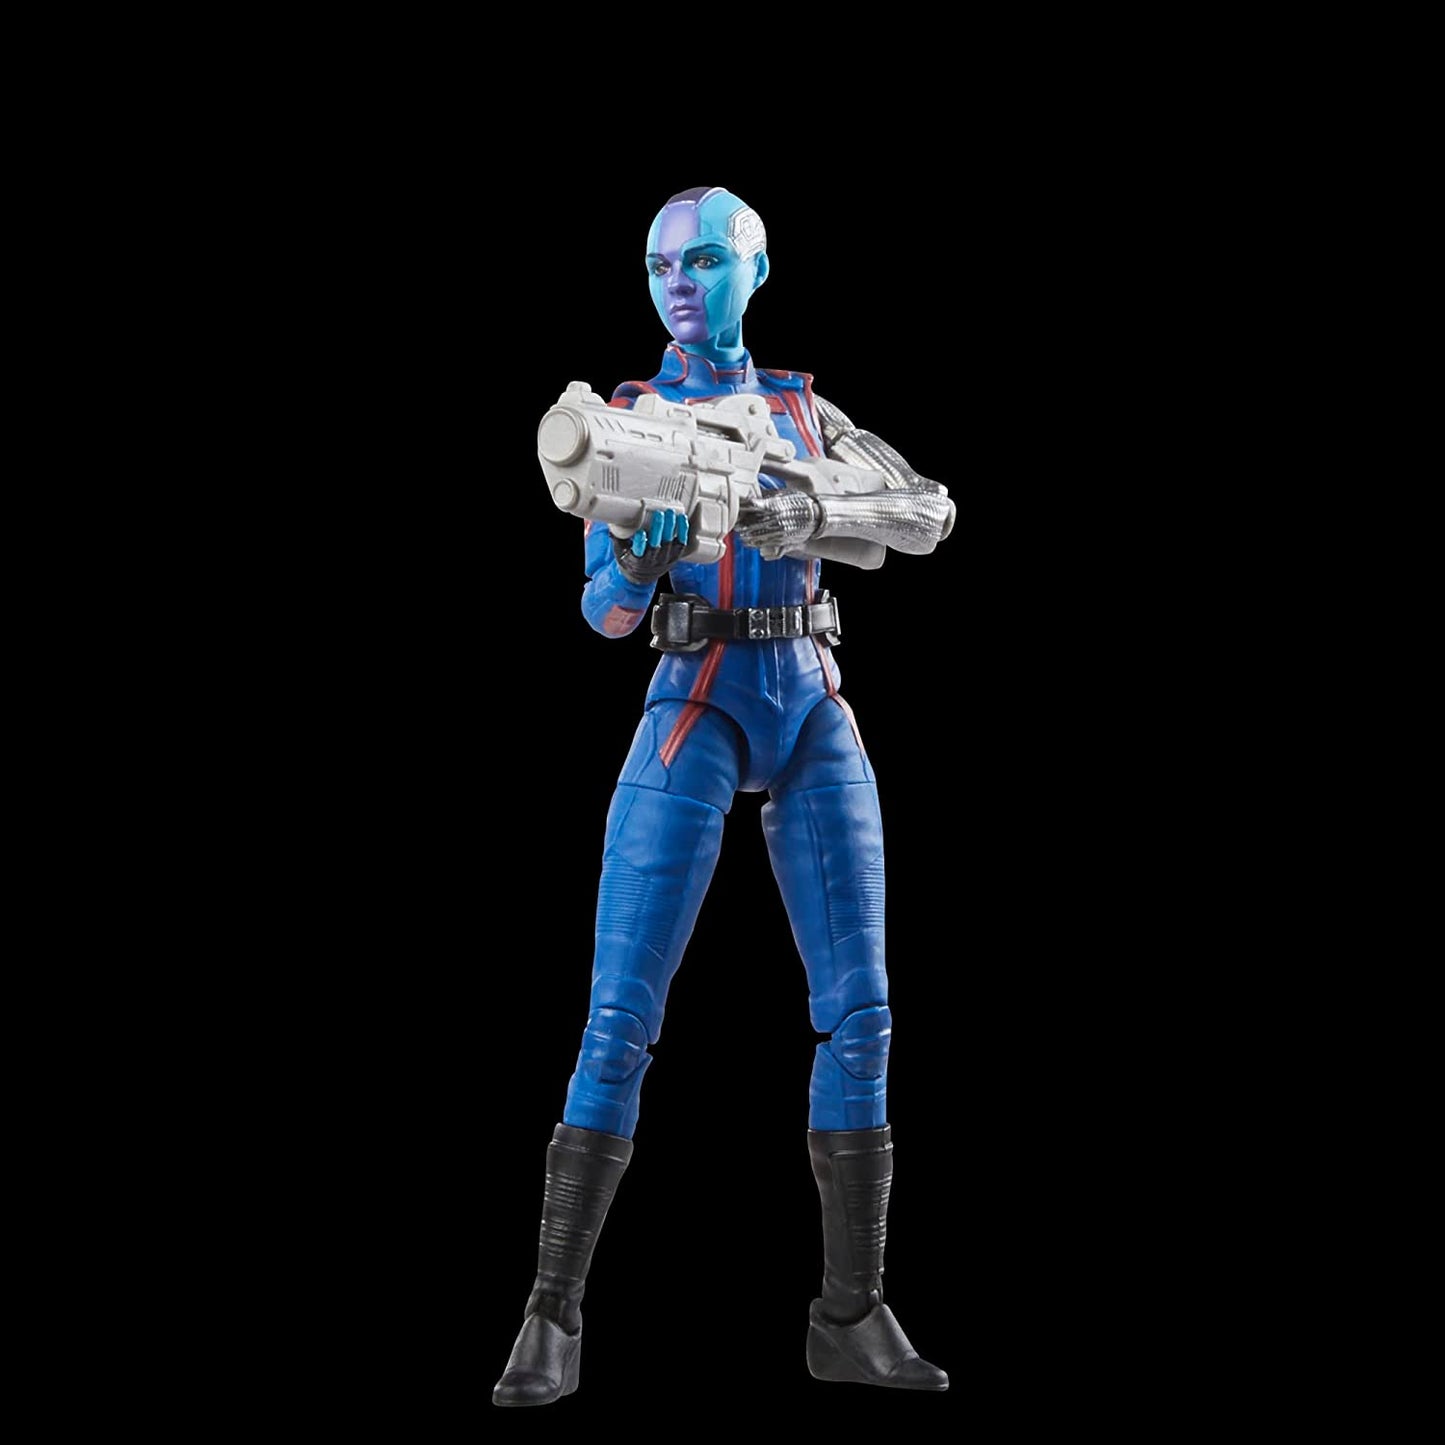  Guardians of the Galaxy Vol. 3 Marvel Legends Nebula 6-Inch Action Figure Toy with weapon - Heretoserveyou